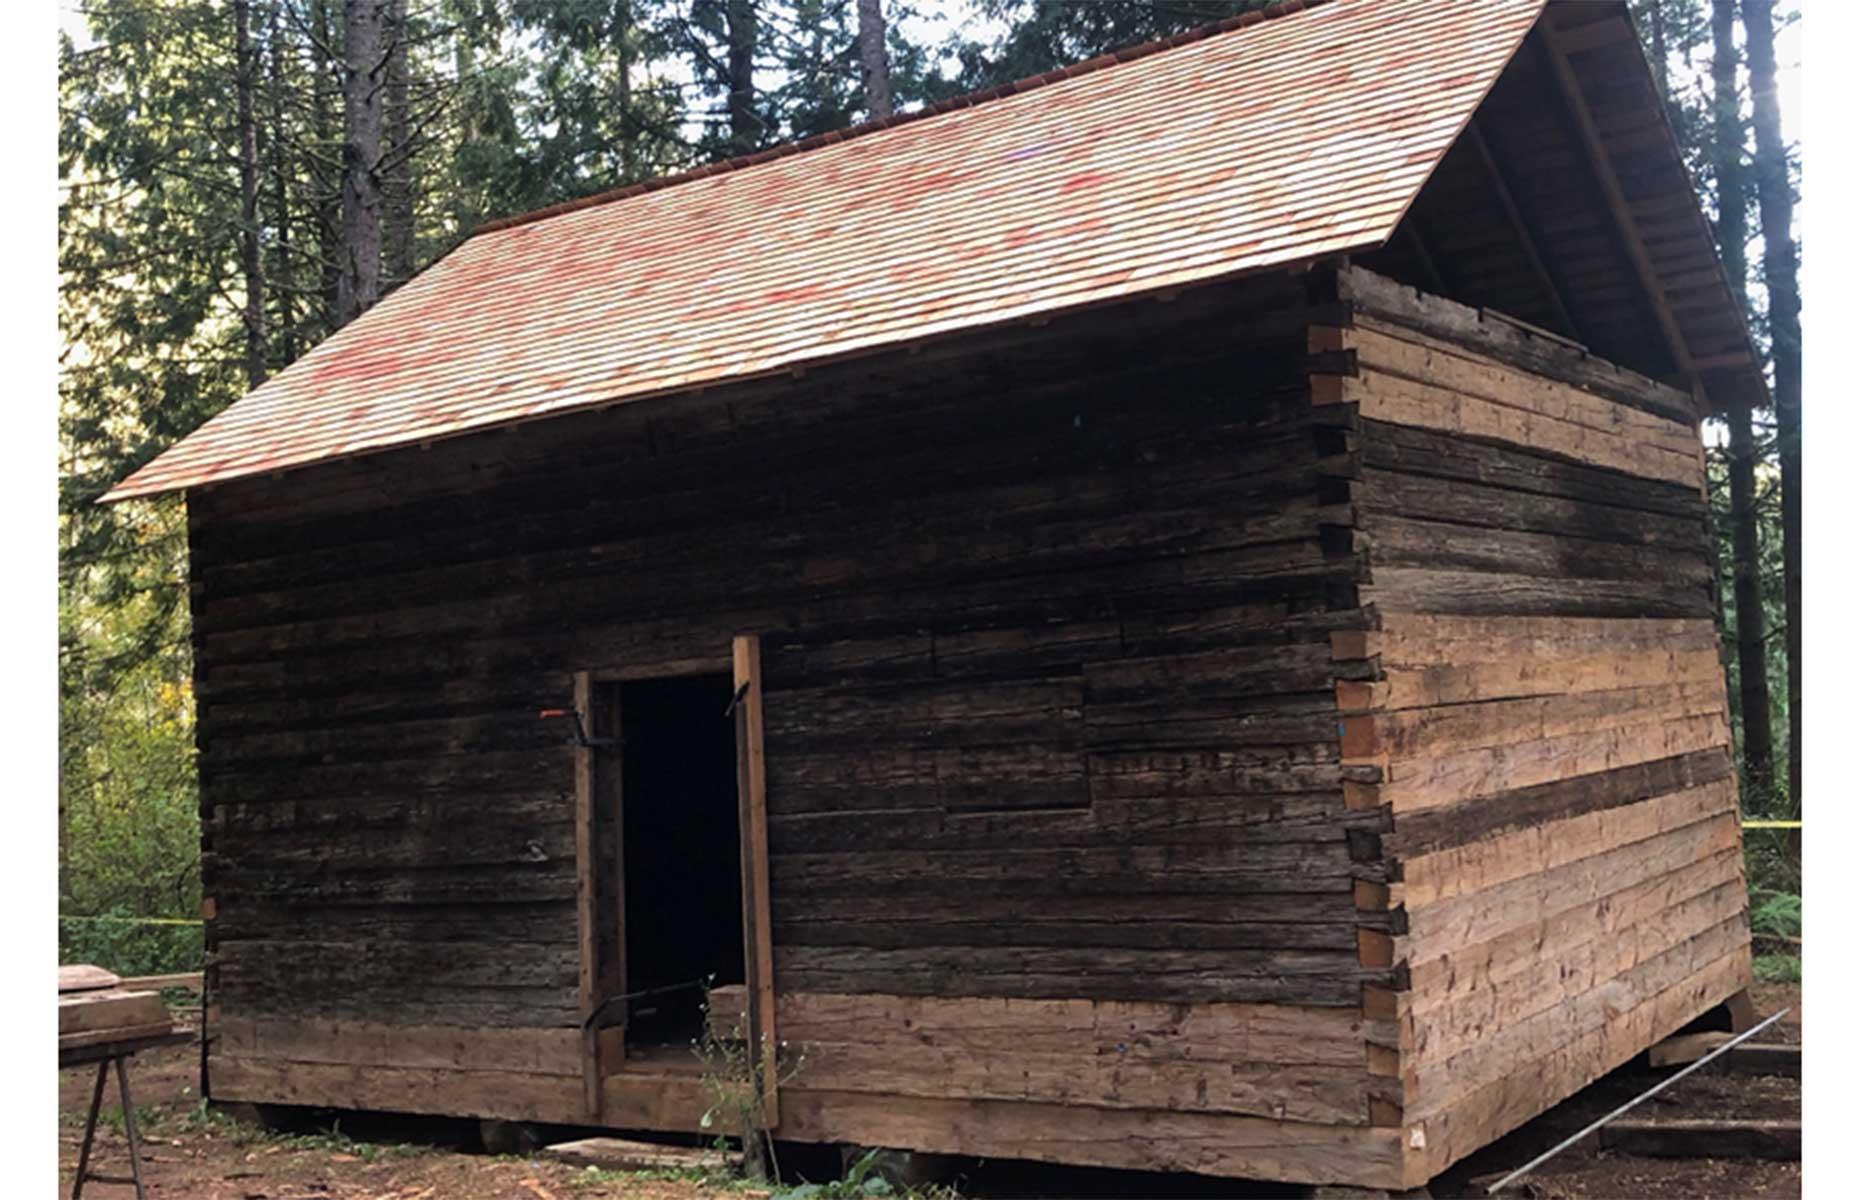 <p>With no known historical written records about this house, which was only discovered in 1984, experts are still unsure where the Molalla Log House originally stood – or even what purpose it served. Historians discovered that the house had been <a href="https://extension.oregonstate.edu/news/historic-molalla-log-house-finds-new-home-hopkins-demonstration-forest">moved from an unknown location in 1892</a>, so it was recently shifted again to its current location, a setting (hopefully) more similar to its origin. Tree ring dating tells us that the false hemlock logs used to construct it were felled in 1799, and it’s been theorized that the house was built by fur traders from Canada. Once the little log house has been restored, it will open for scheduled tours.</p>